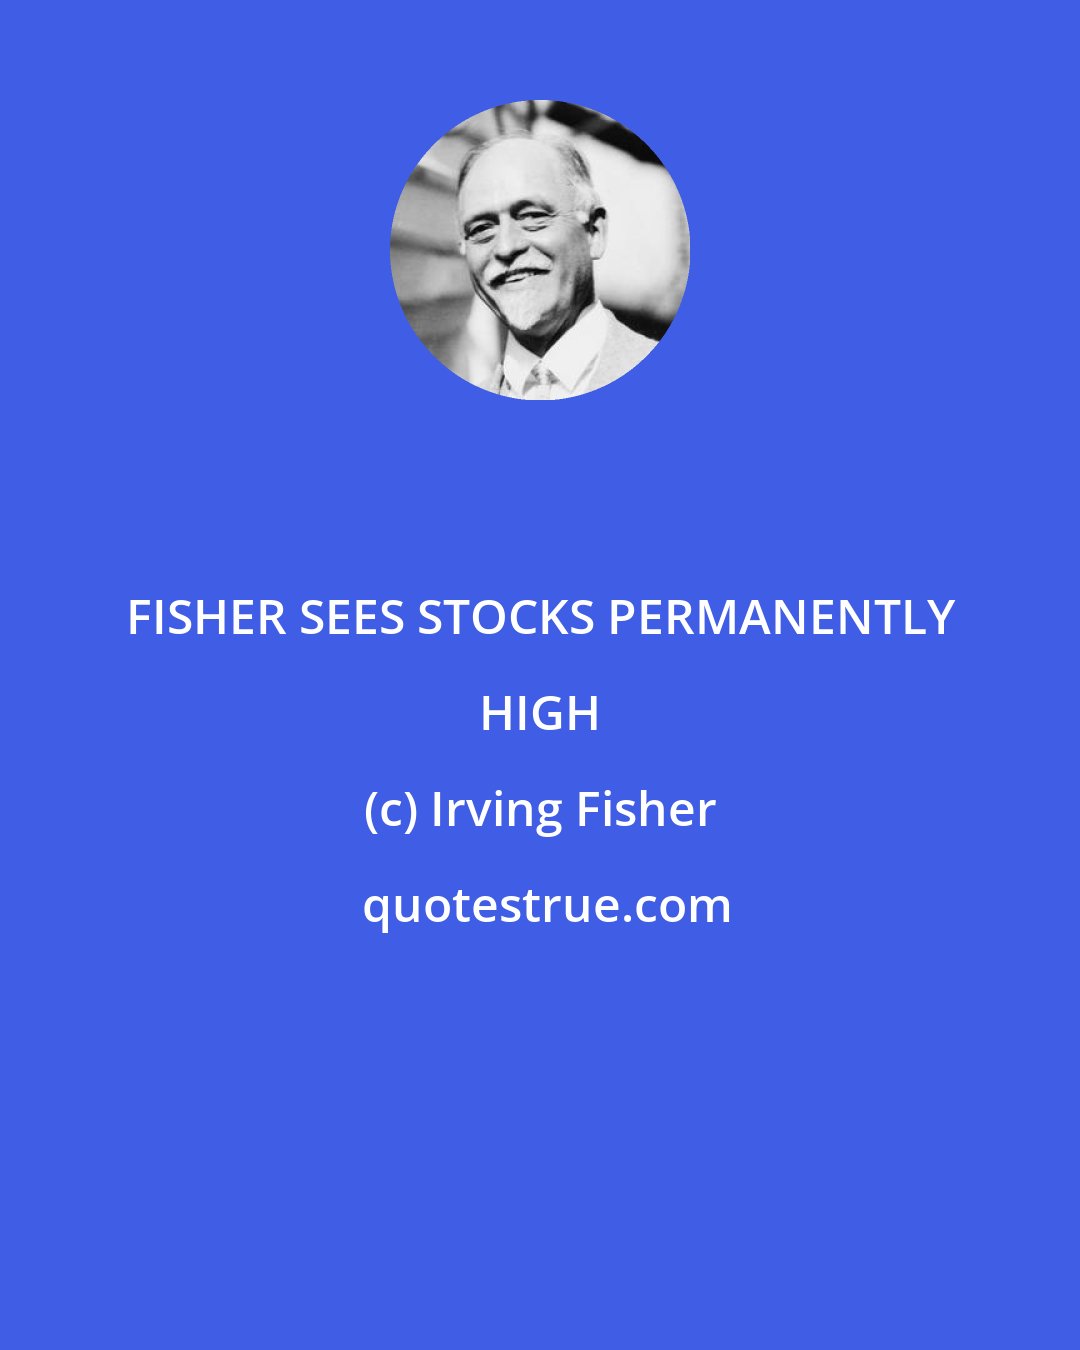 Irving Fisher: FISHER SEES STOCKS PERMANENTLY HIGH